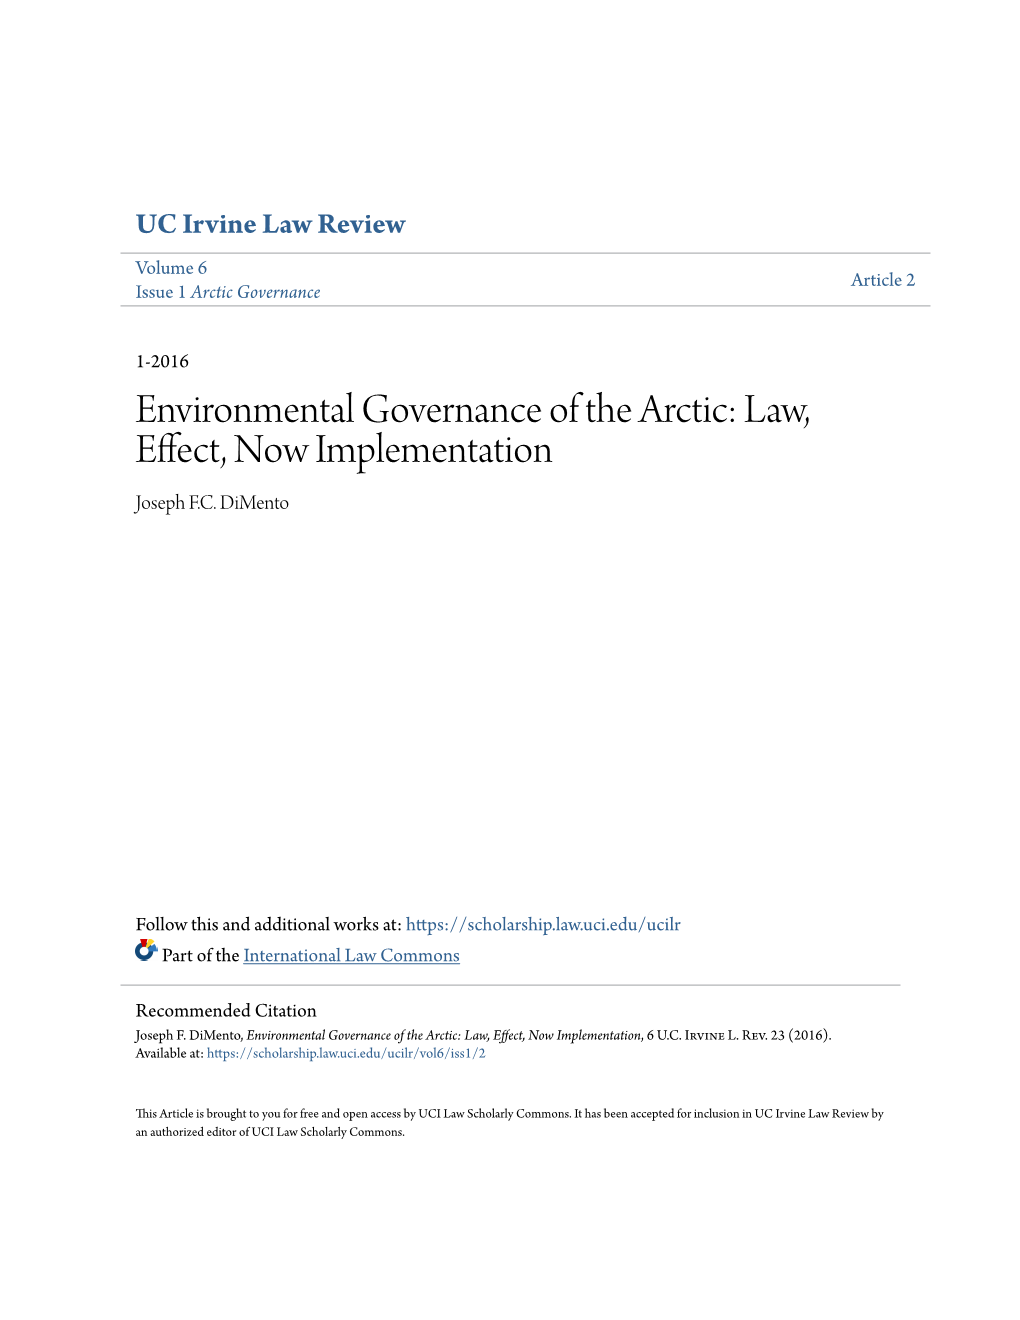 Environmental Governance of the Arctic: Law, Effect, Now Implementation Joseph F.C